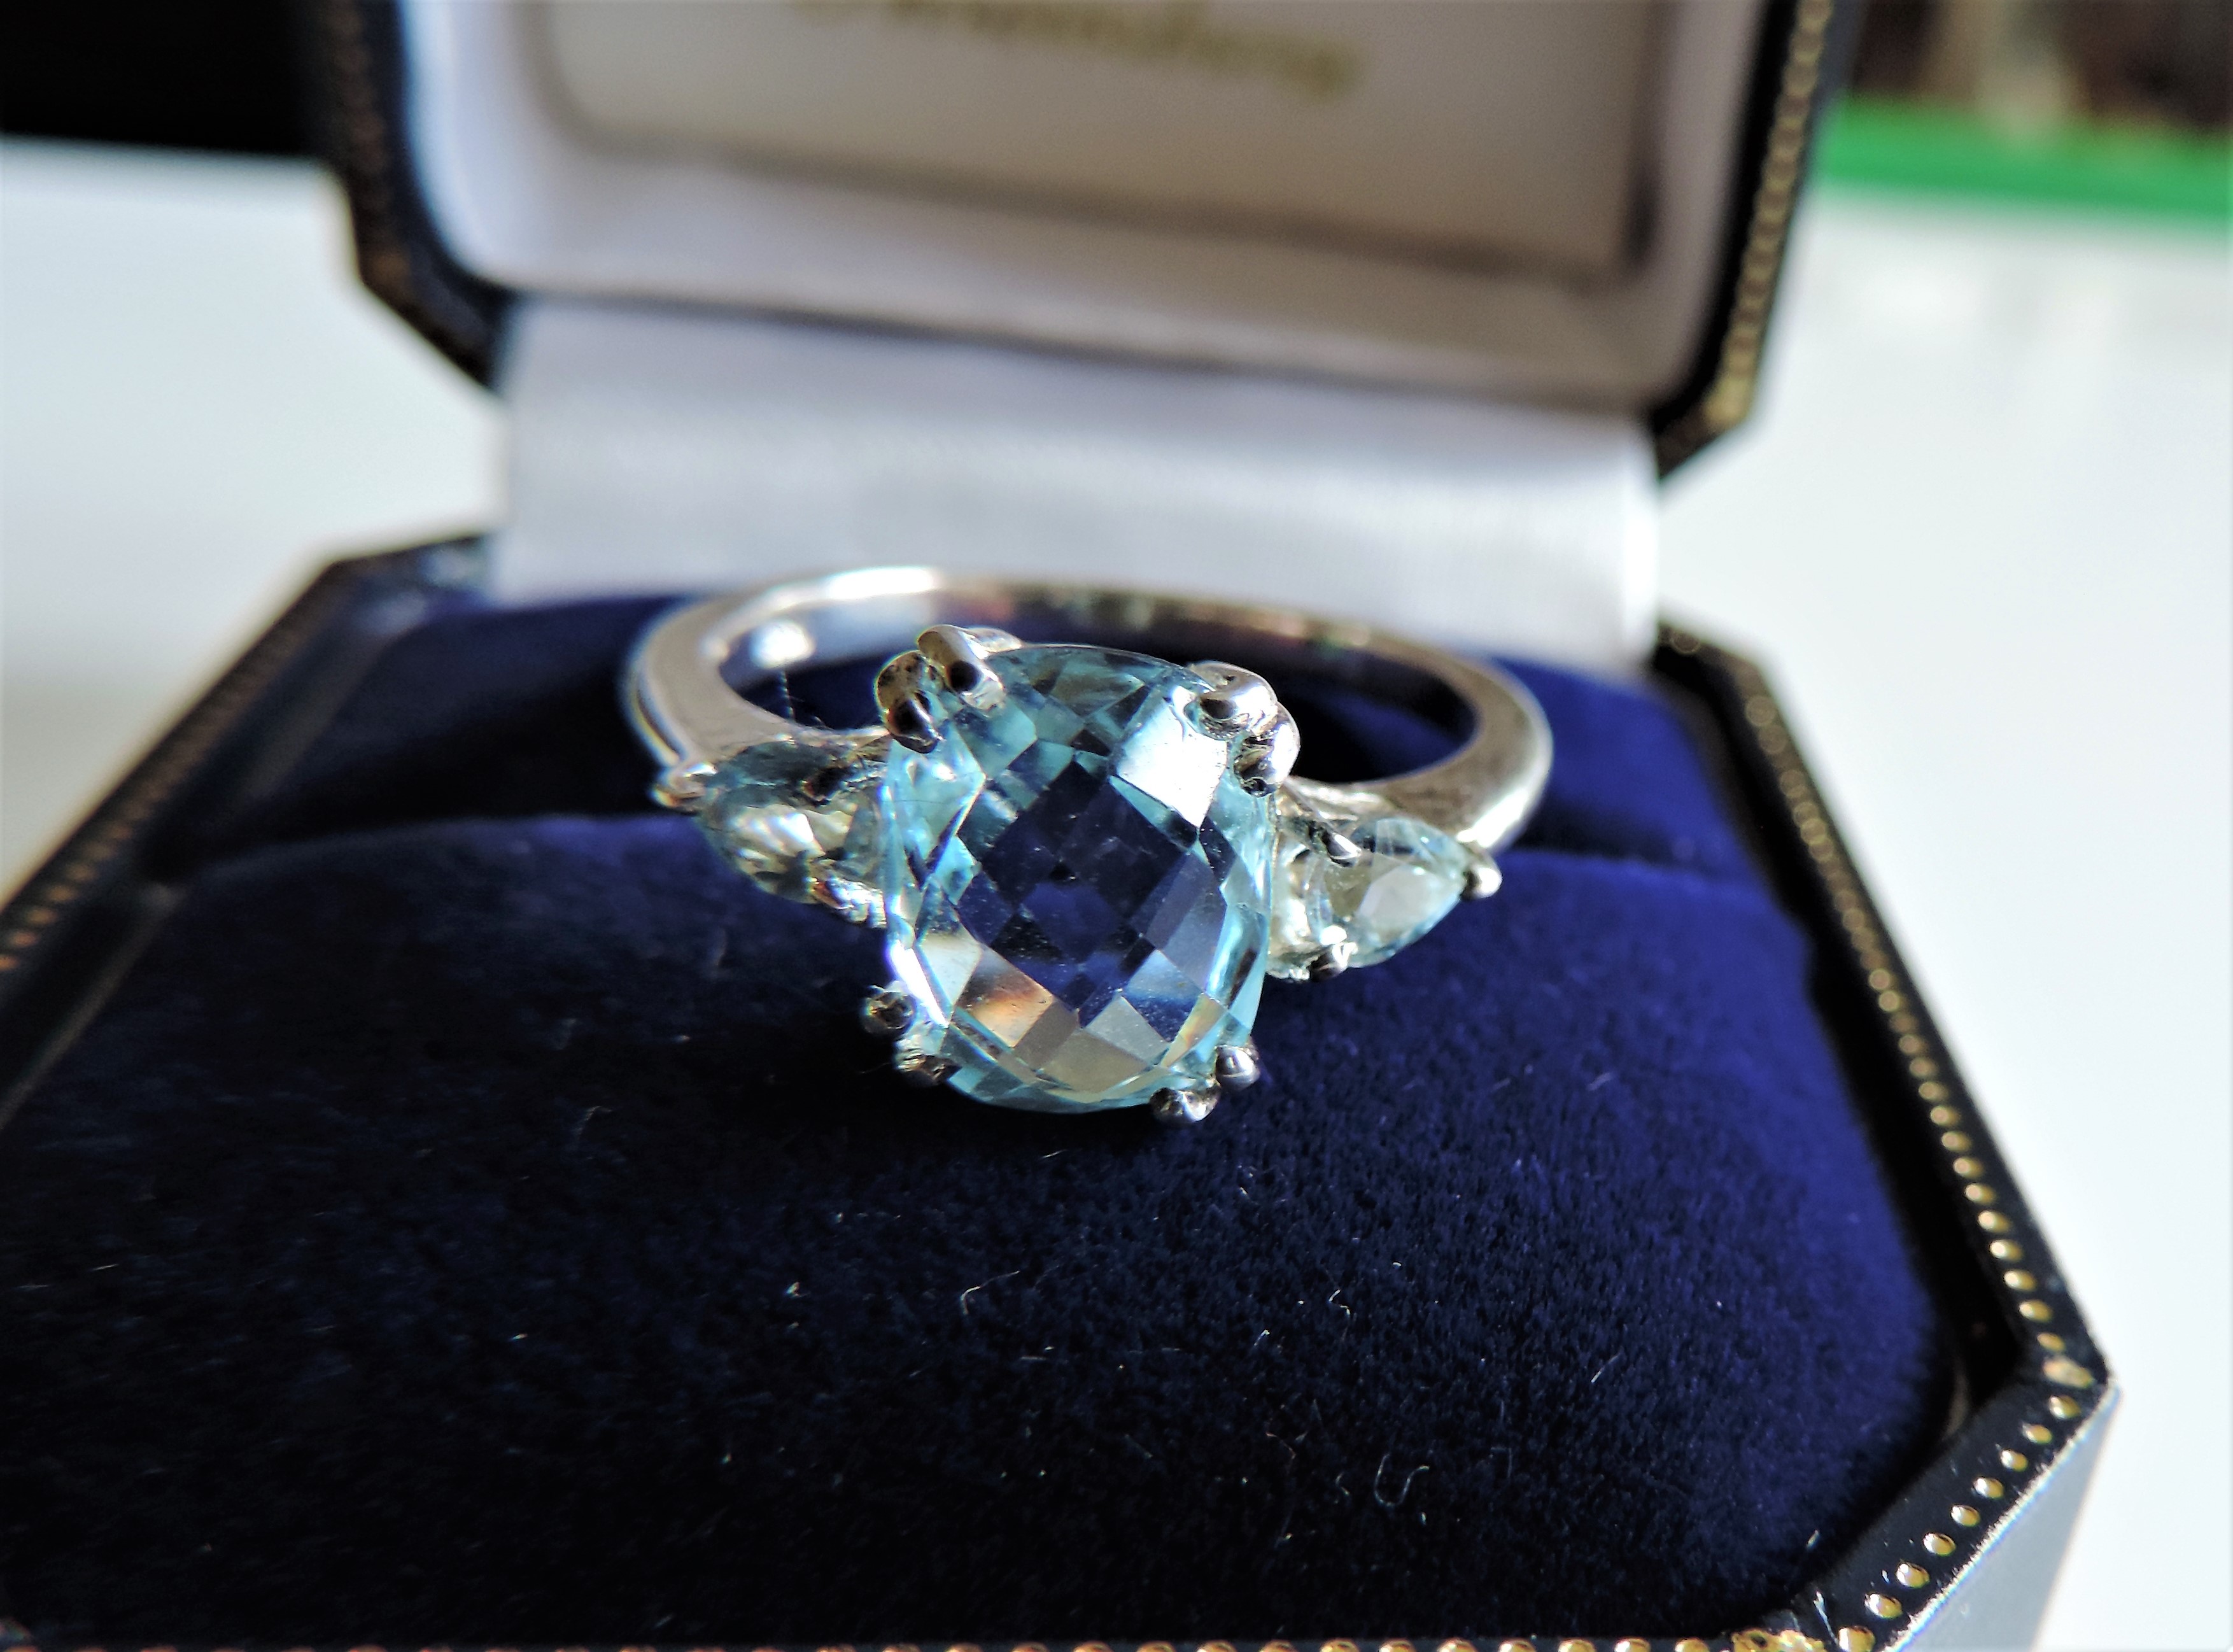 Sterling Silver 3.9ct Blue Topaz Gemstone Ring - Image 3 of 7